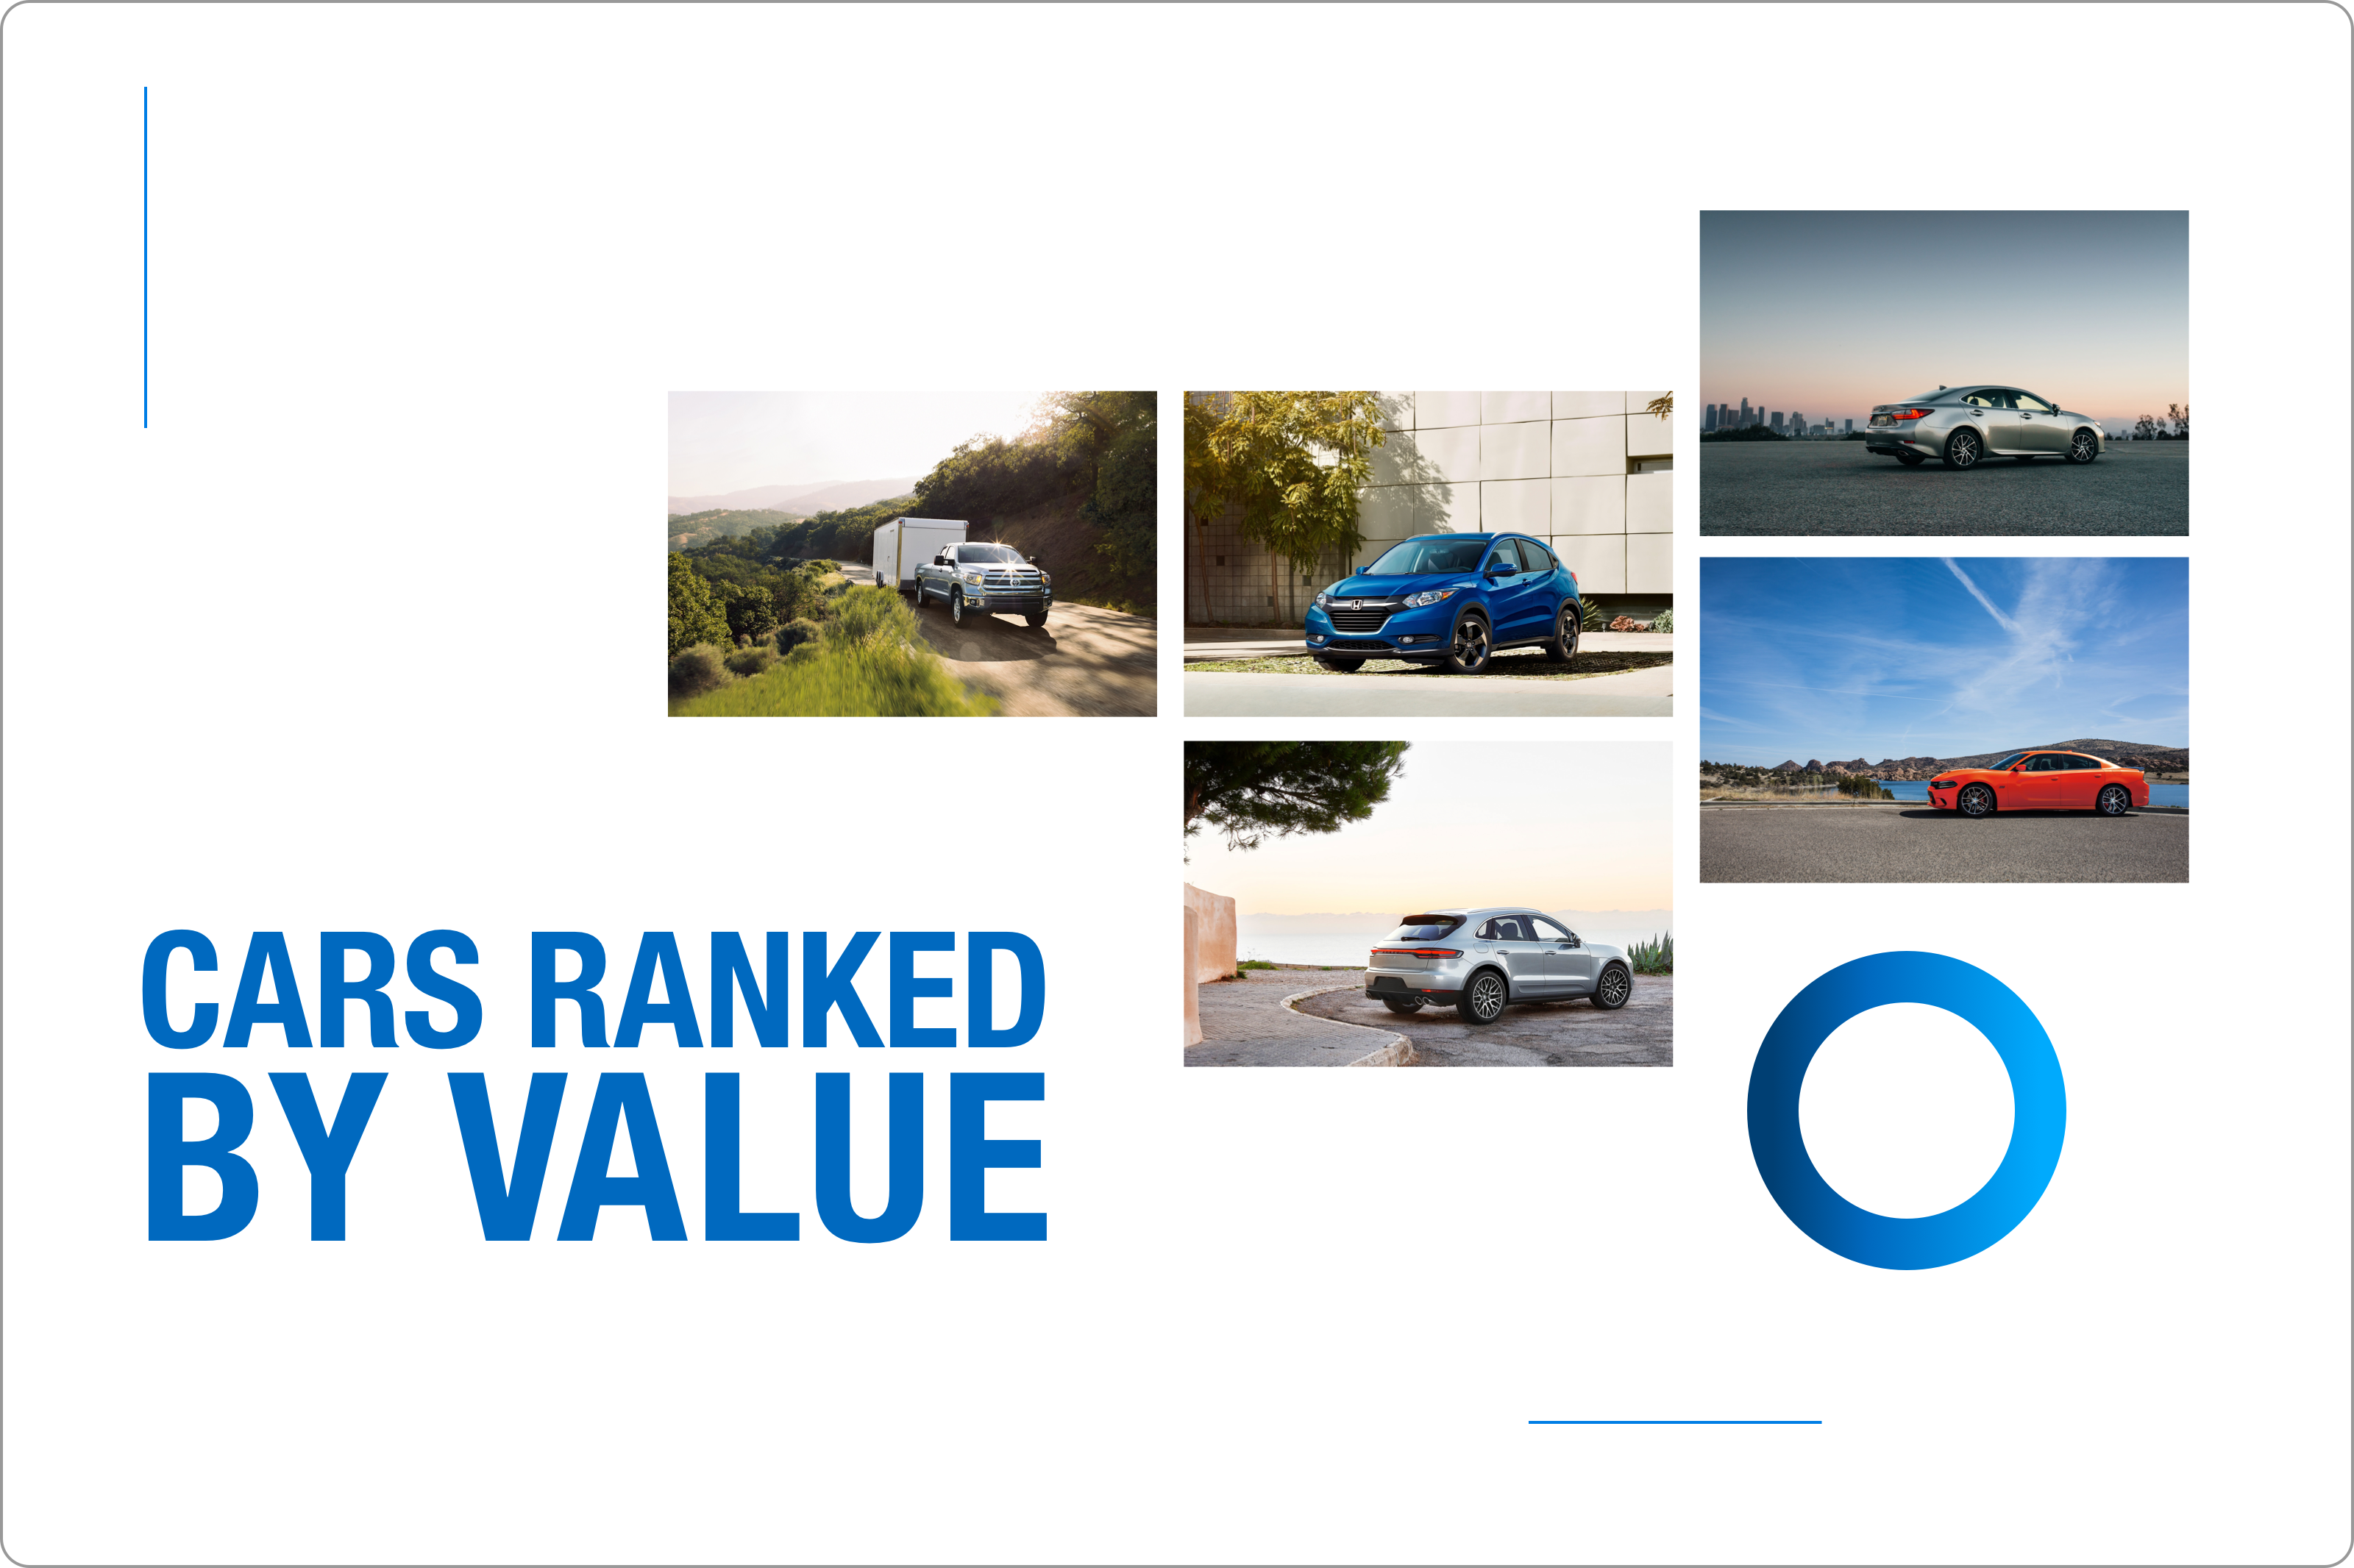 3-Year-Old Vehicles Ranked by Value